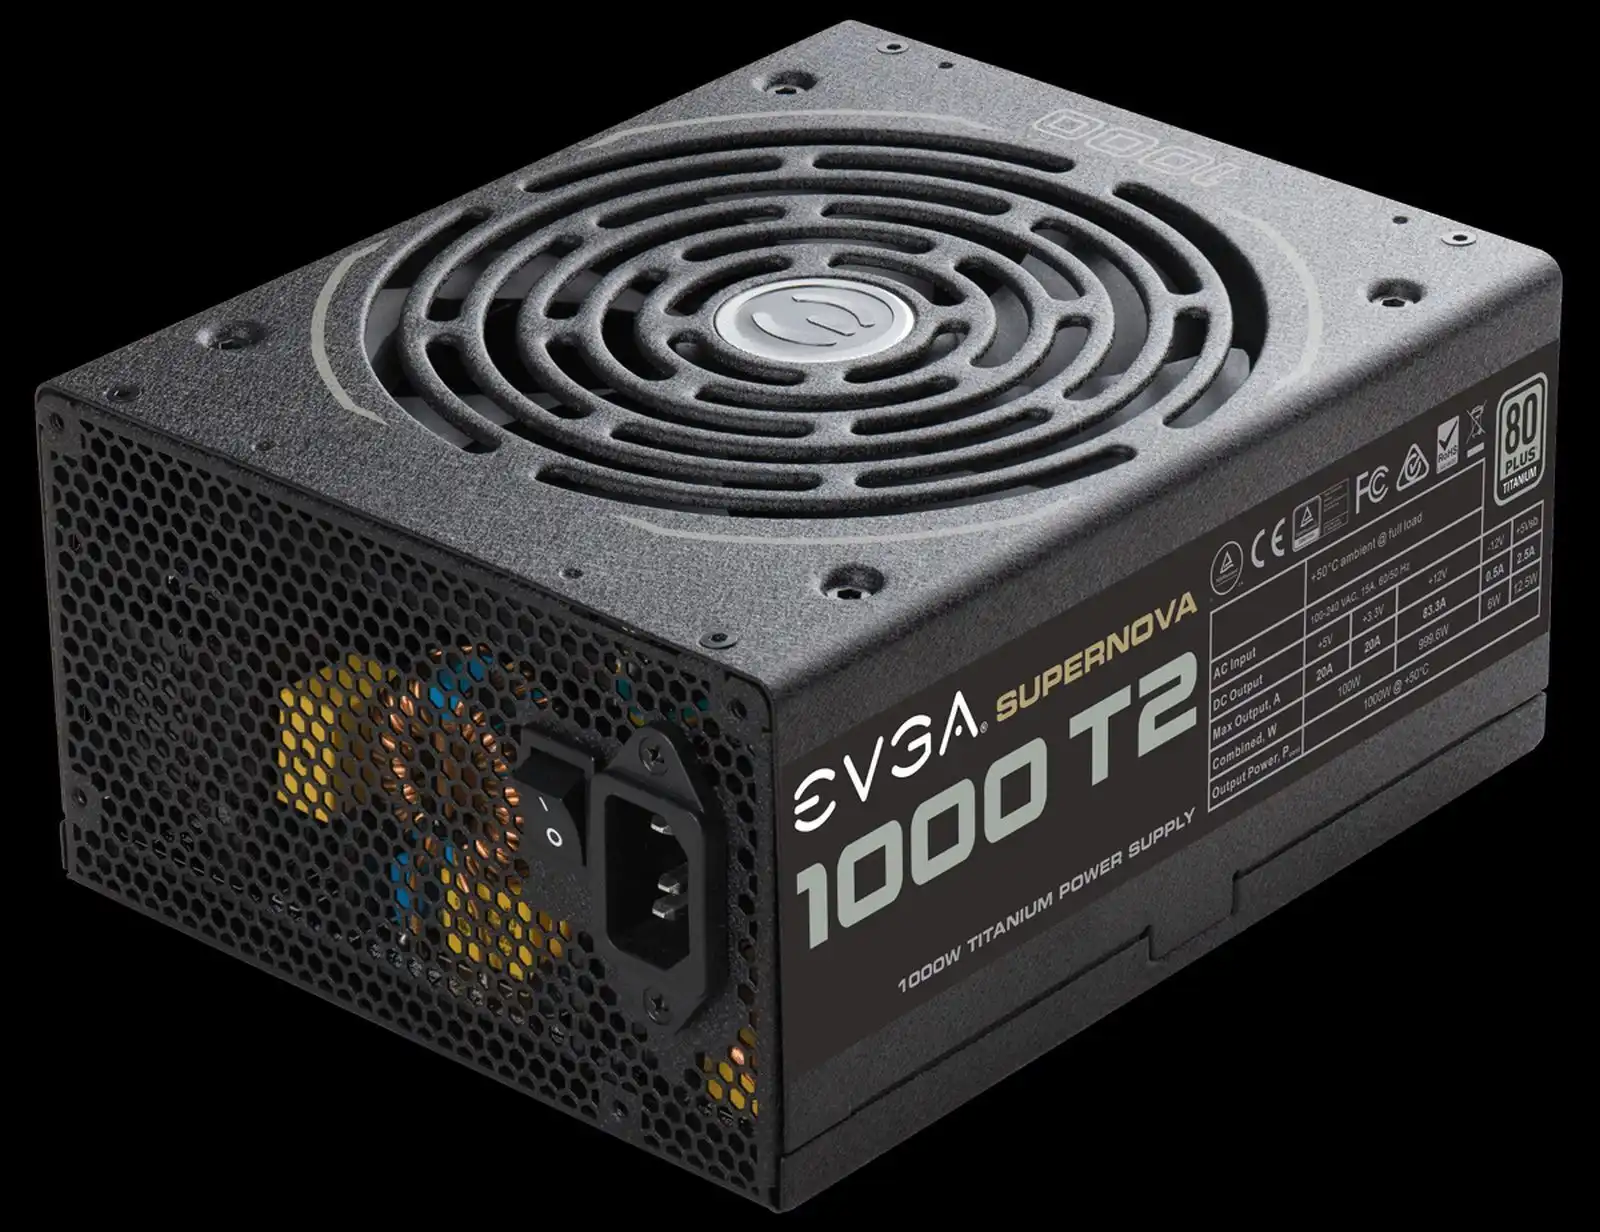 Which PSU Type Is Suitable For Overclocking?